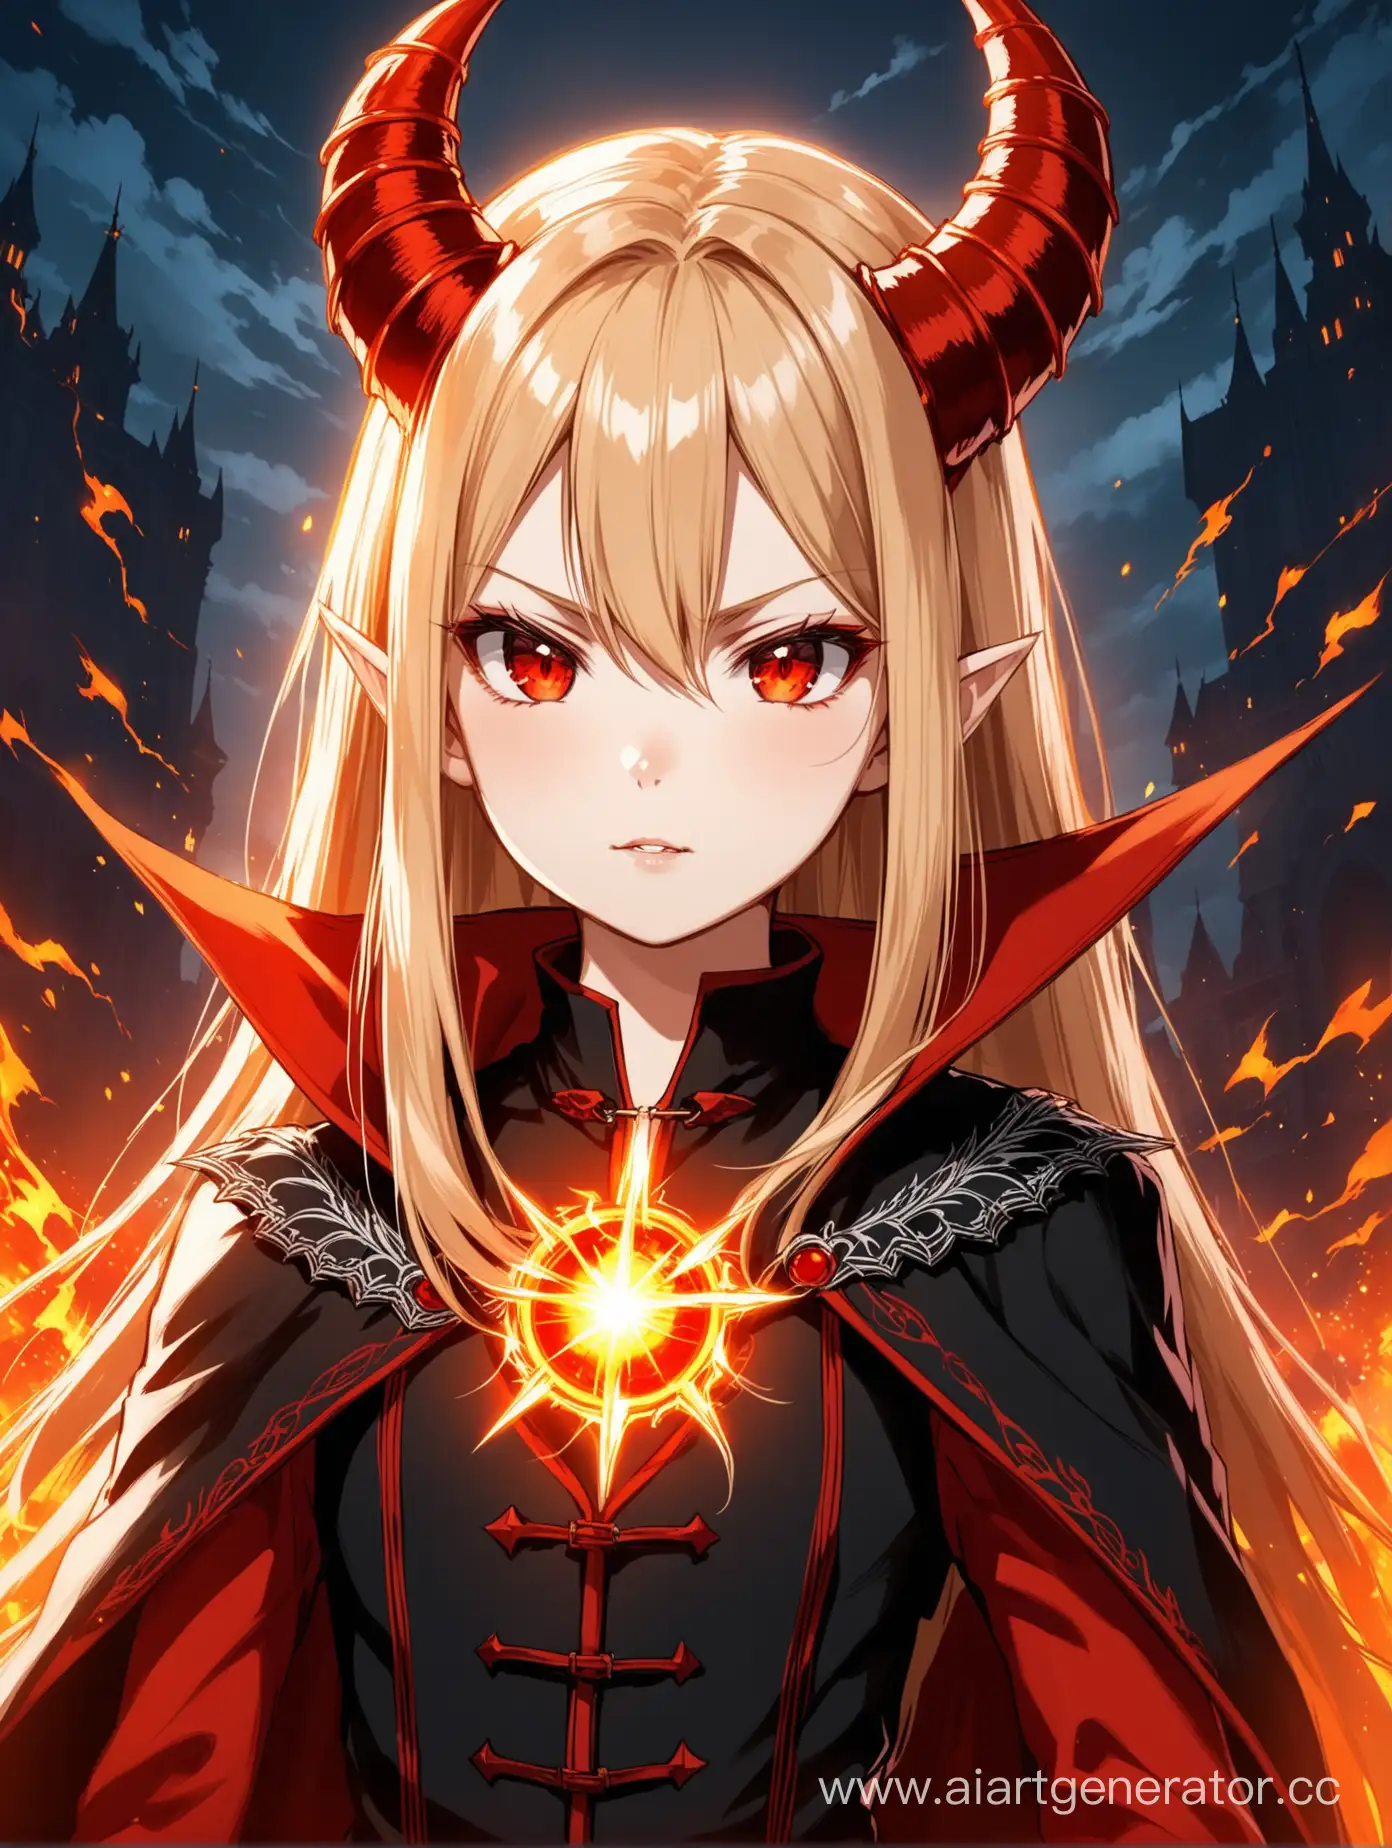 Beautiful-Anime-Russian-Vampire-Goddess-with-Fire-and-Lightning-Powers